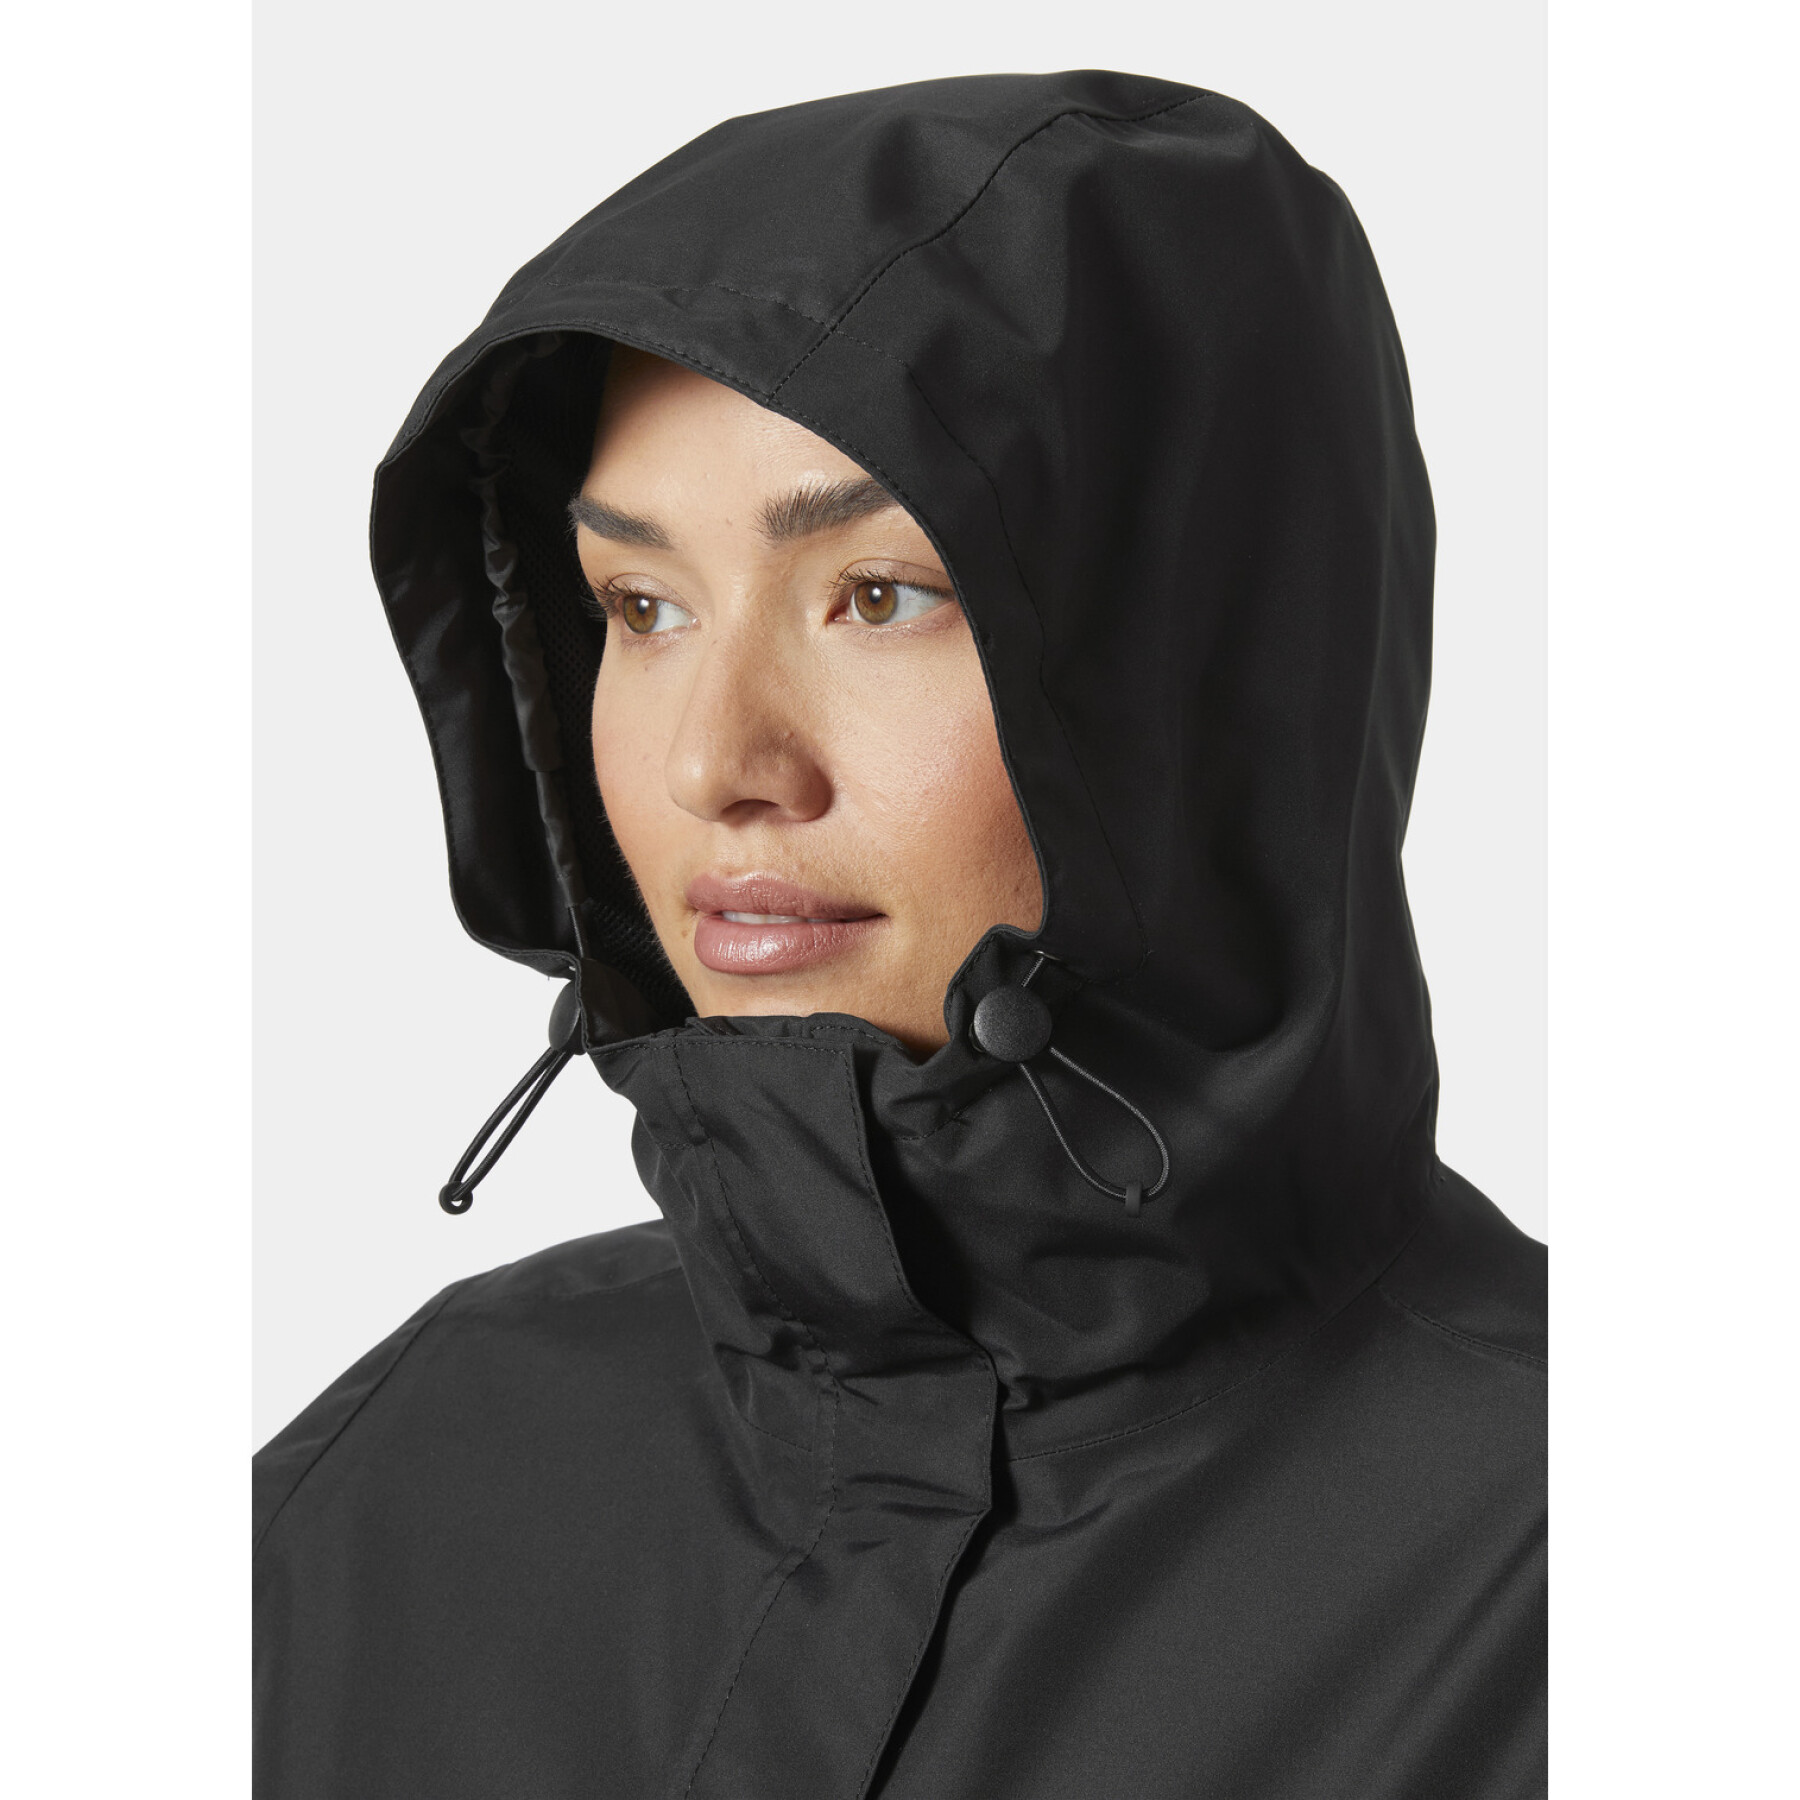 Chaqueta impermeable Helly Hansen Voyage